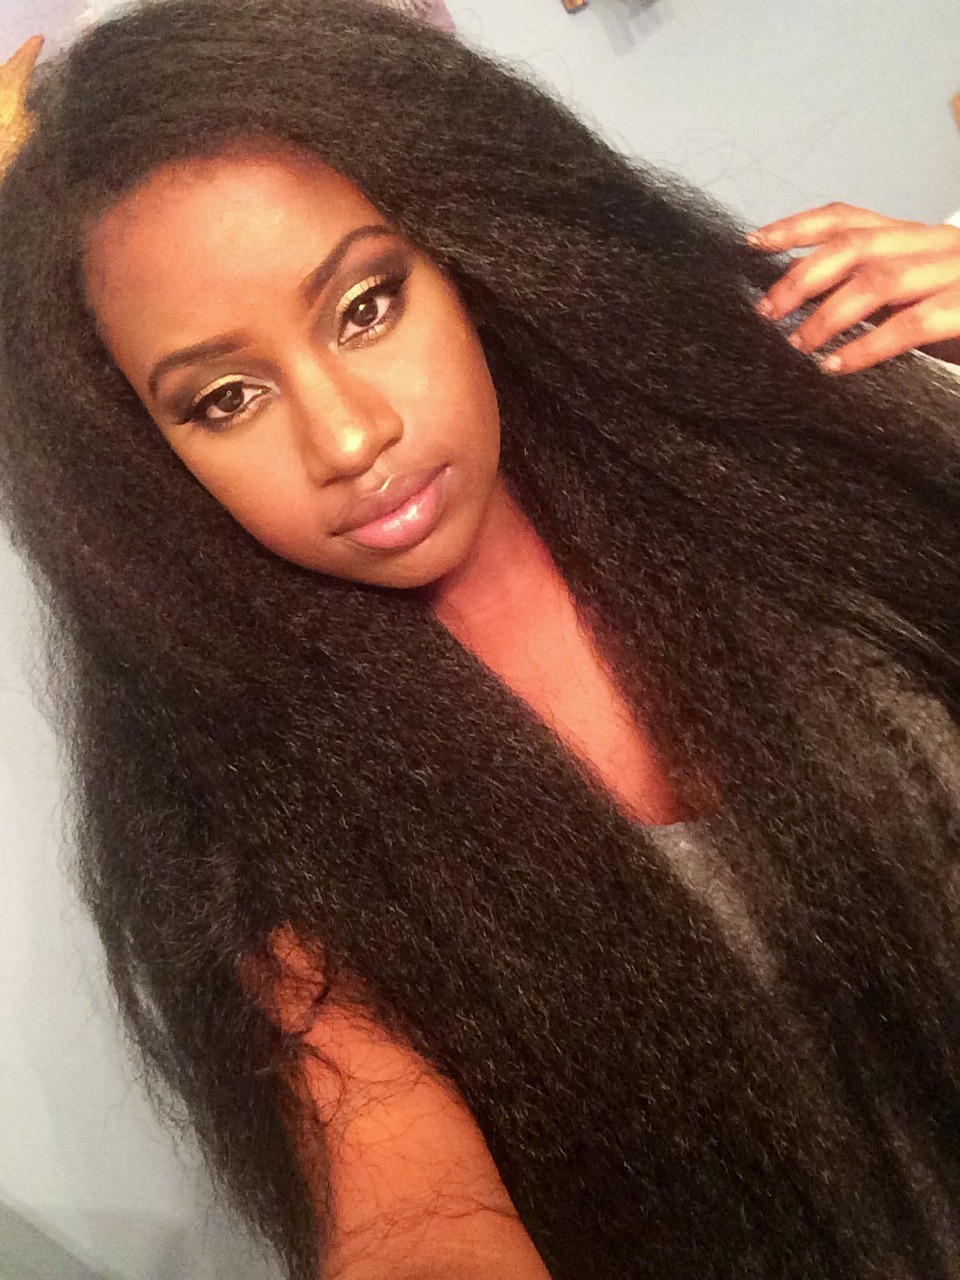 Long lace front wigs for black women